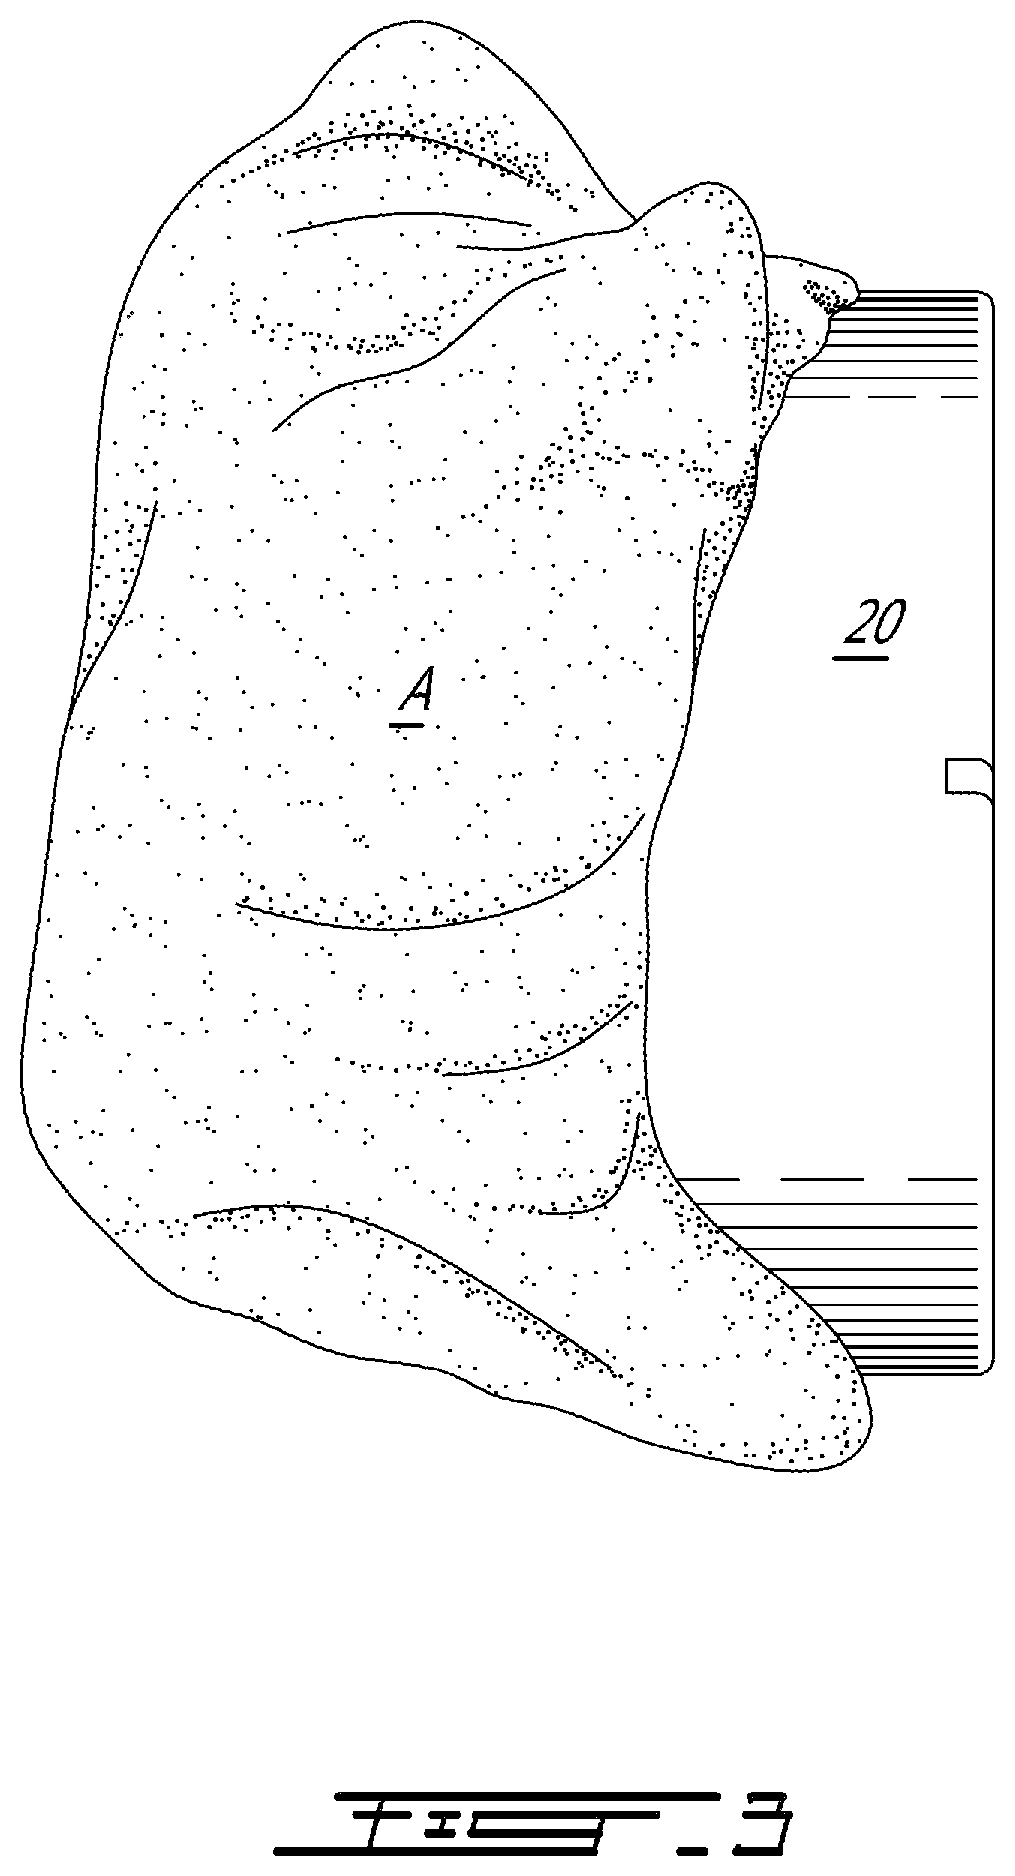 Patient-specific instrumentation for patellar resurfacing surgery and method